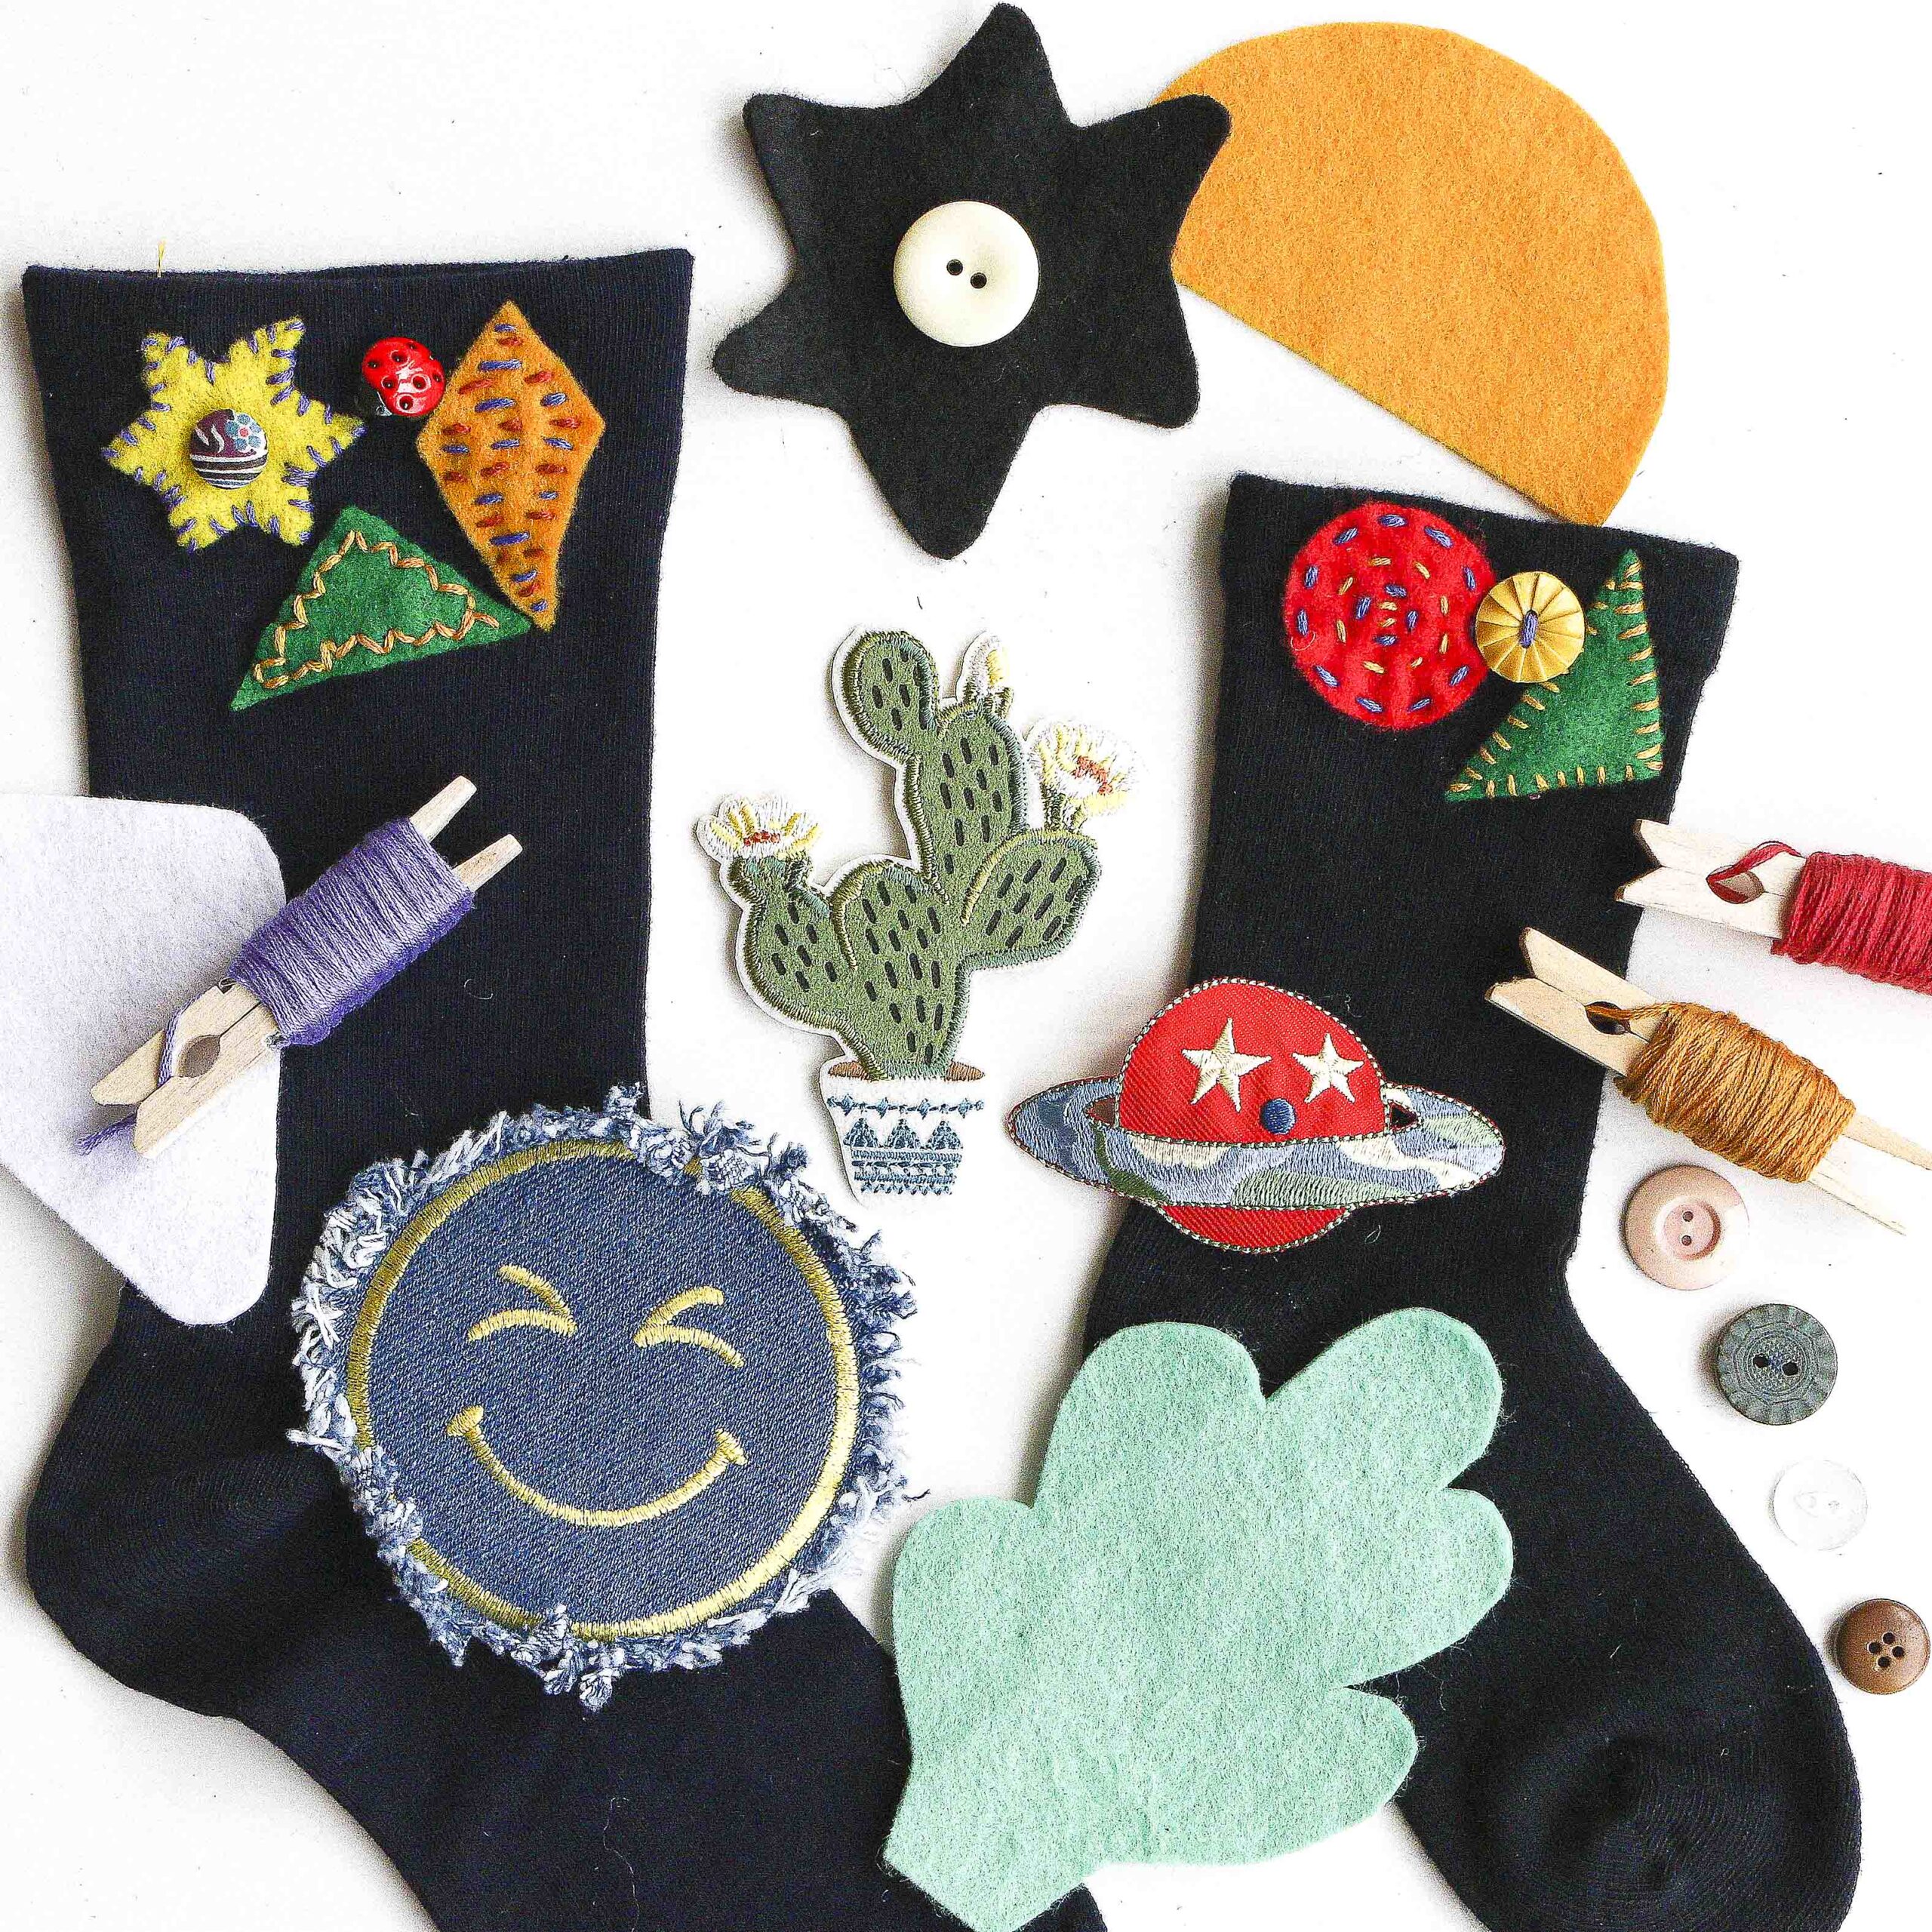 Twinning Parent and Child Sock Craft Upcycle Activity Kit